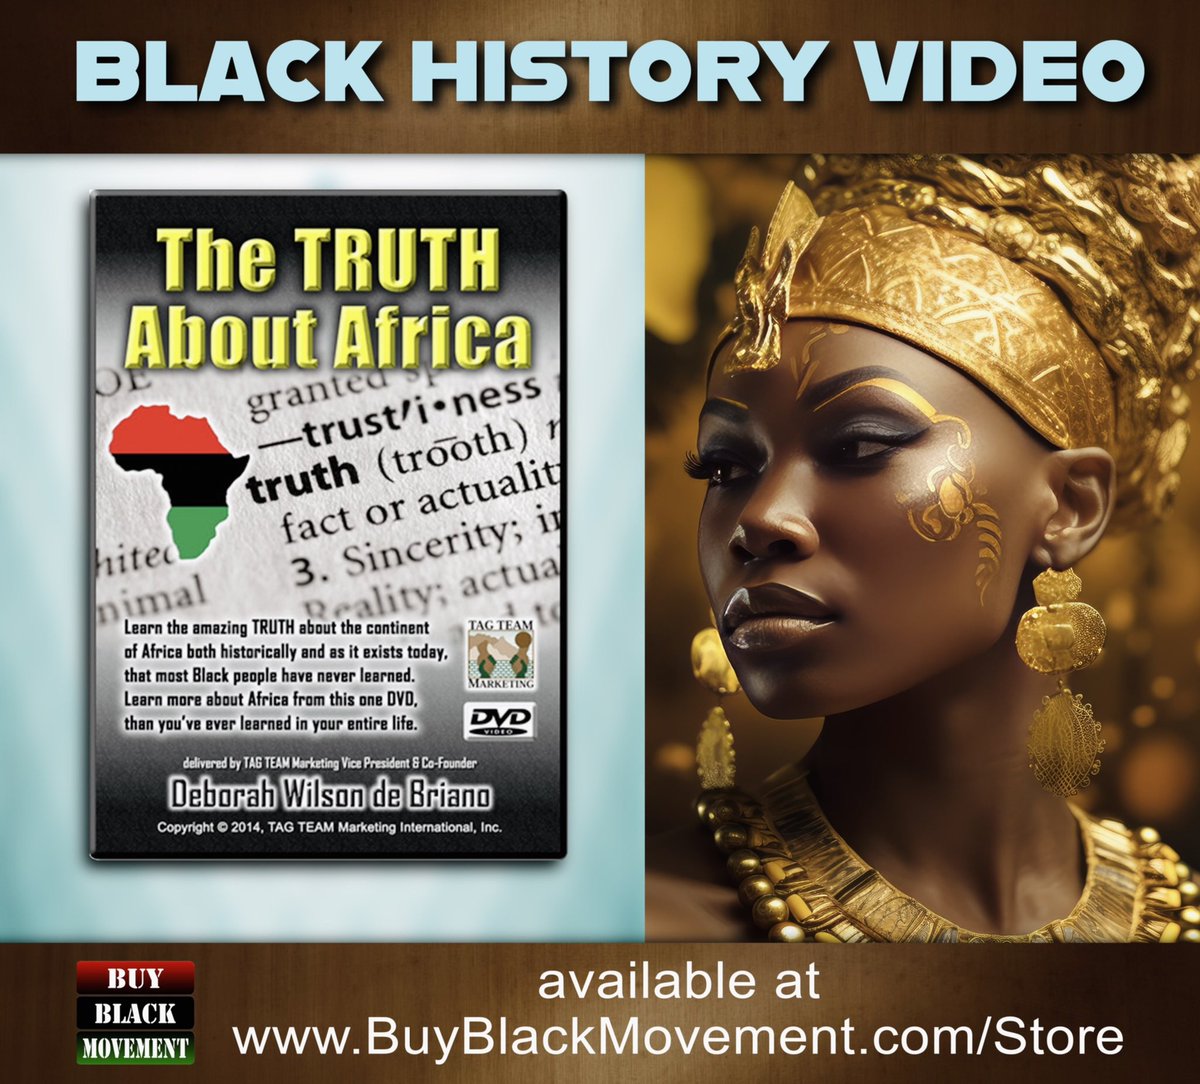 We know that Africa is our ancestral home, but how many of us have actually SEEN it? What are some African customs? Are there still similarities between Africans & Black people in the diaspora? All these & MORE are answered in The Truth About Africa!👇🏾 BuyBlackMovement.com/Store